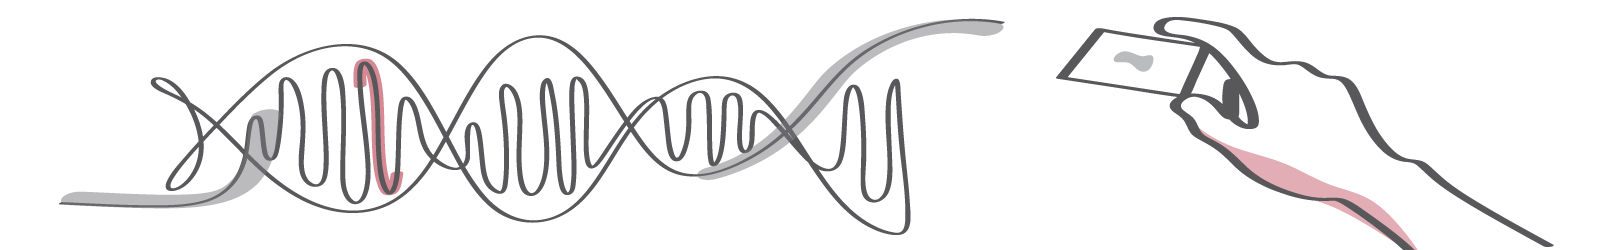 Line drawing of DNA strand